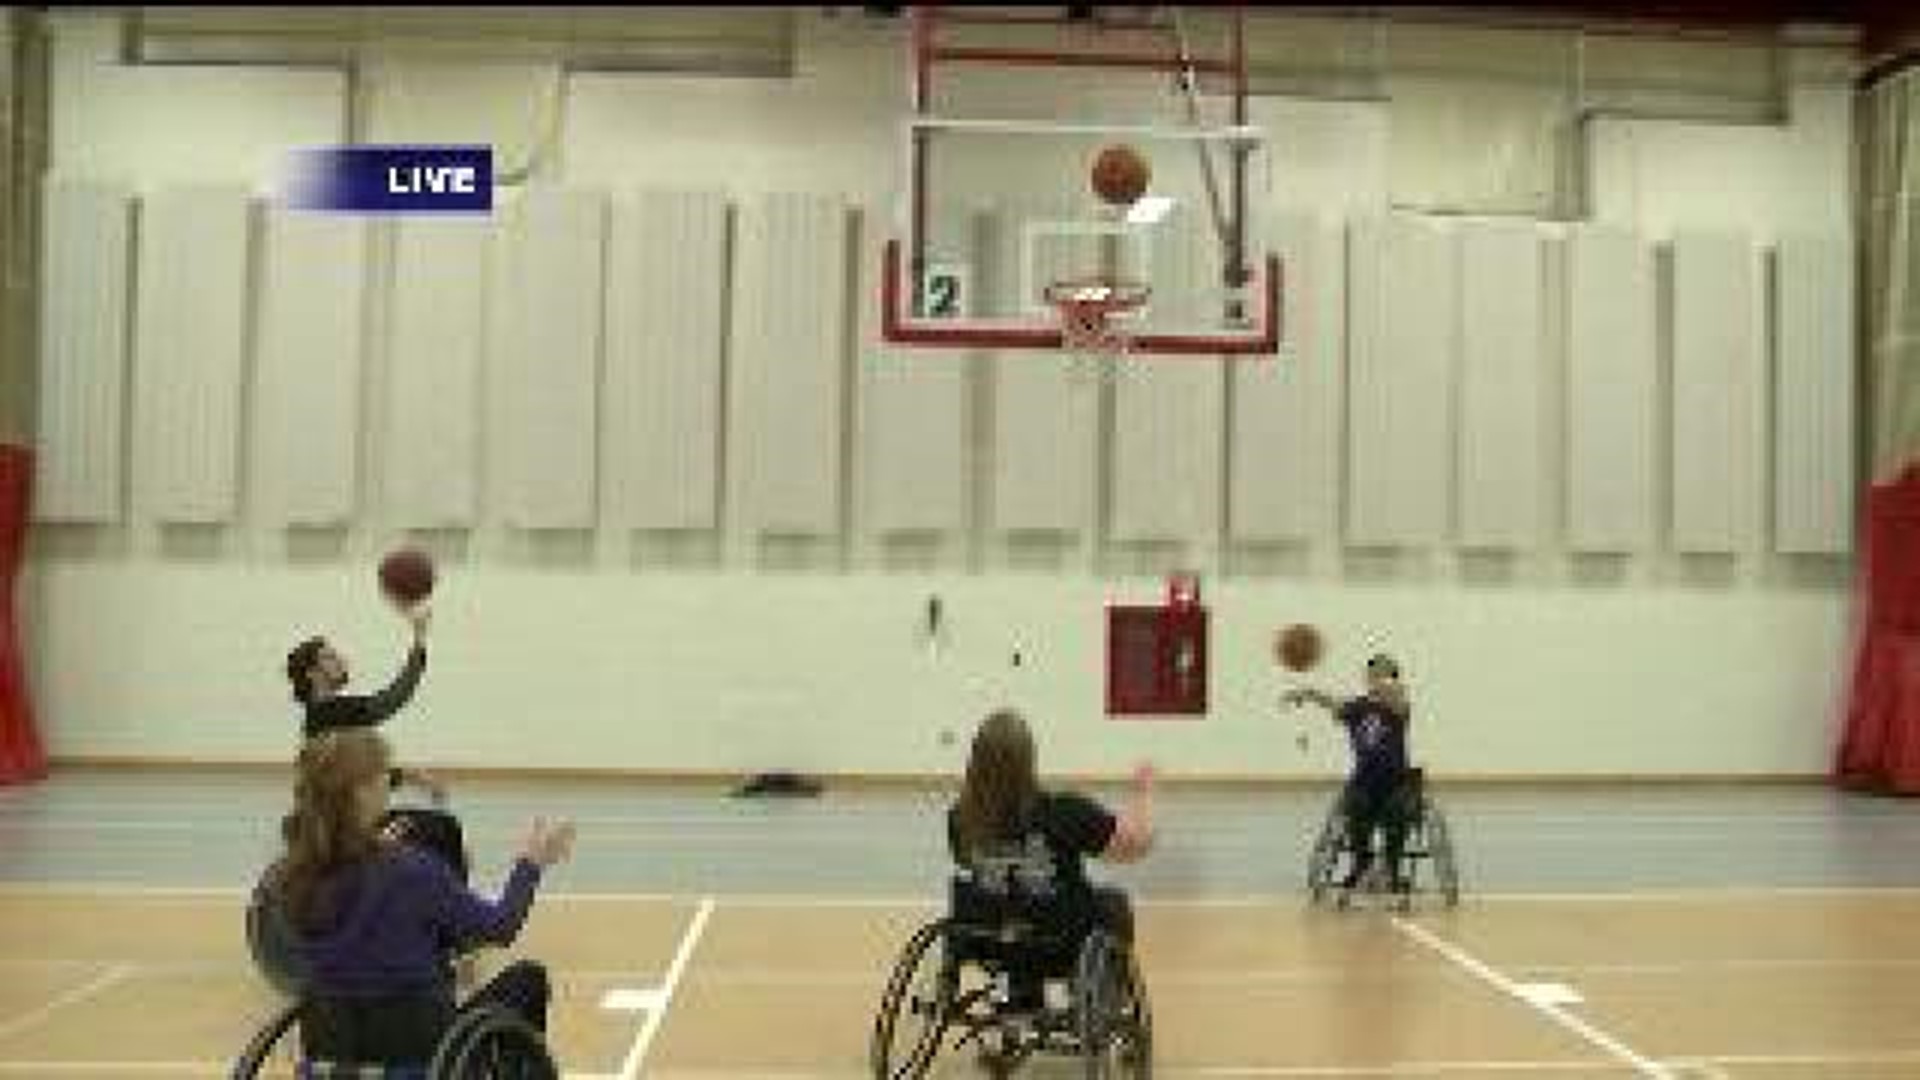 College Students Gear Up for Basketball Event